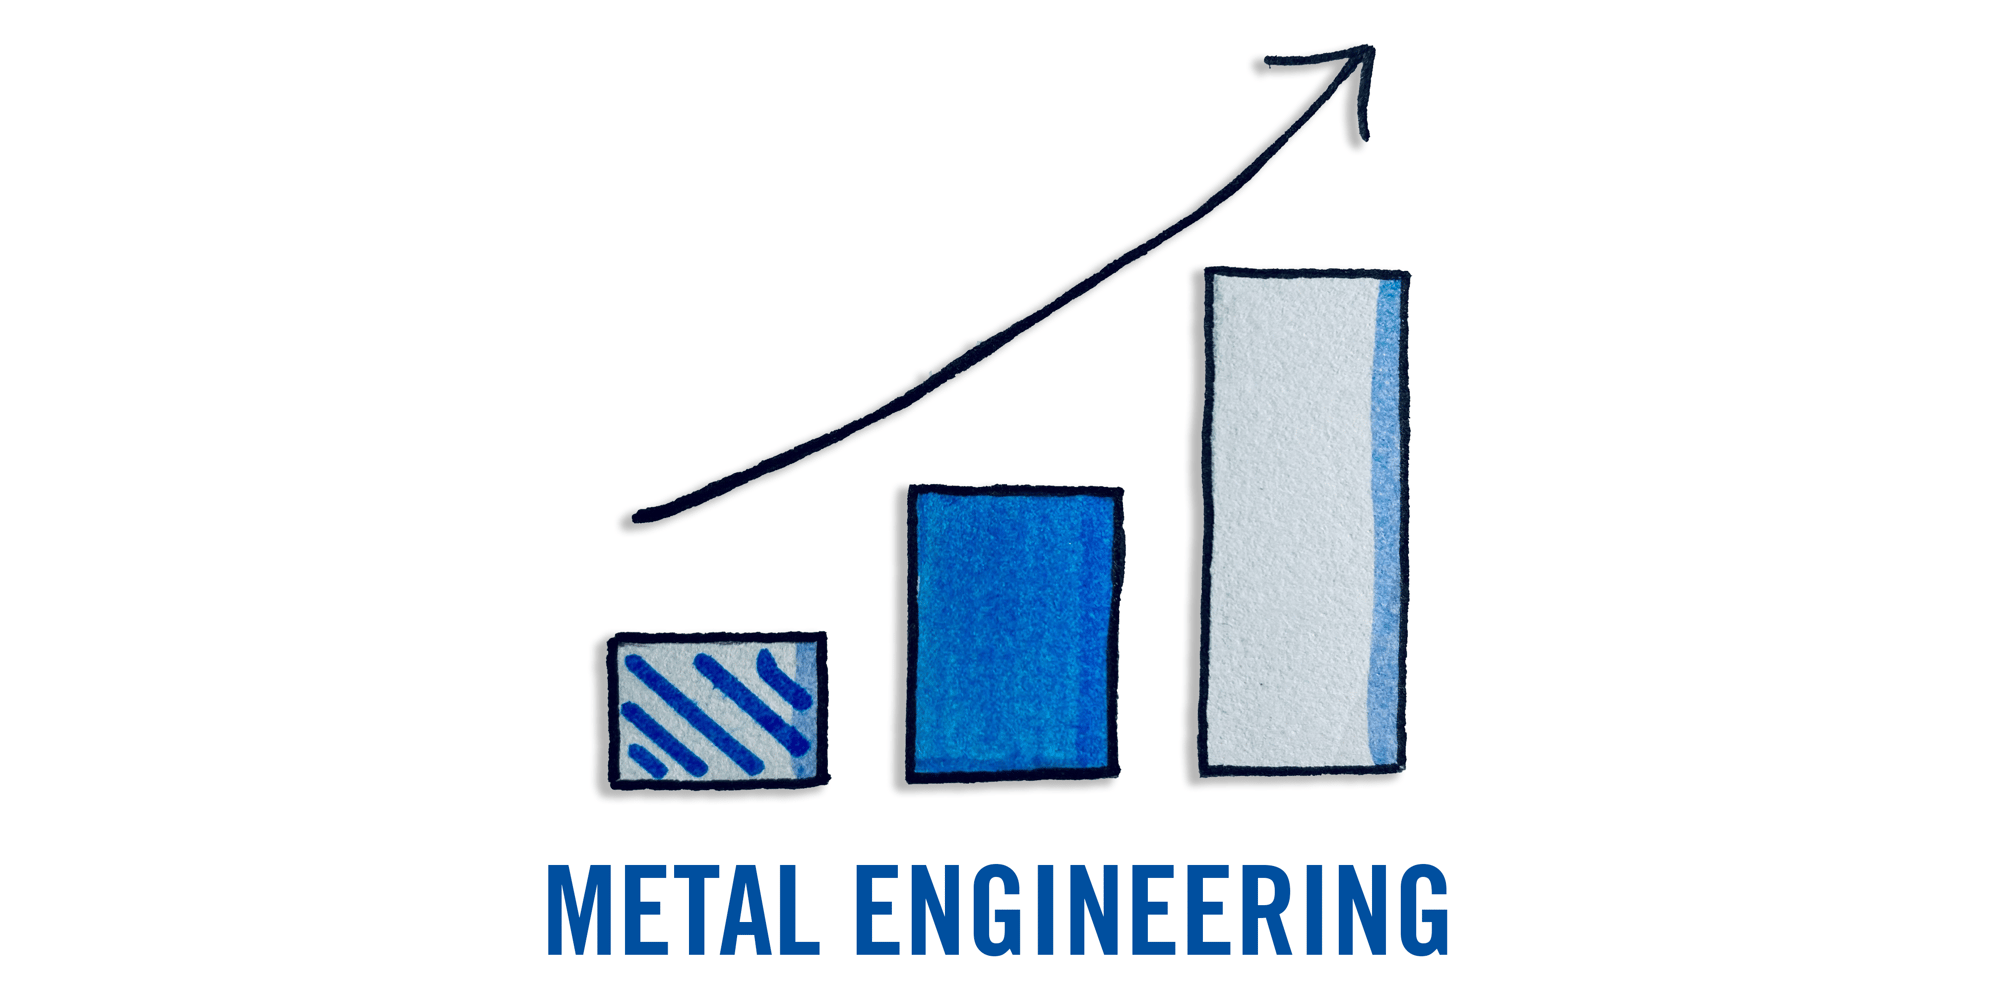 The effect of rising metal costs on metal engineering